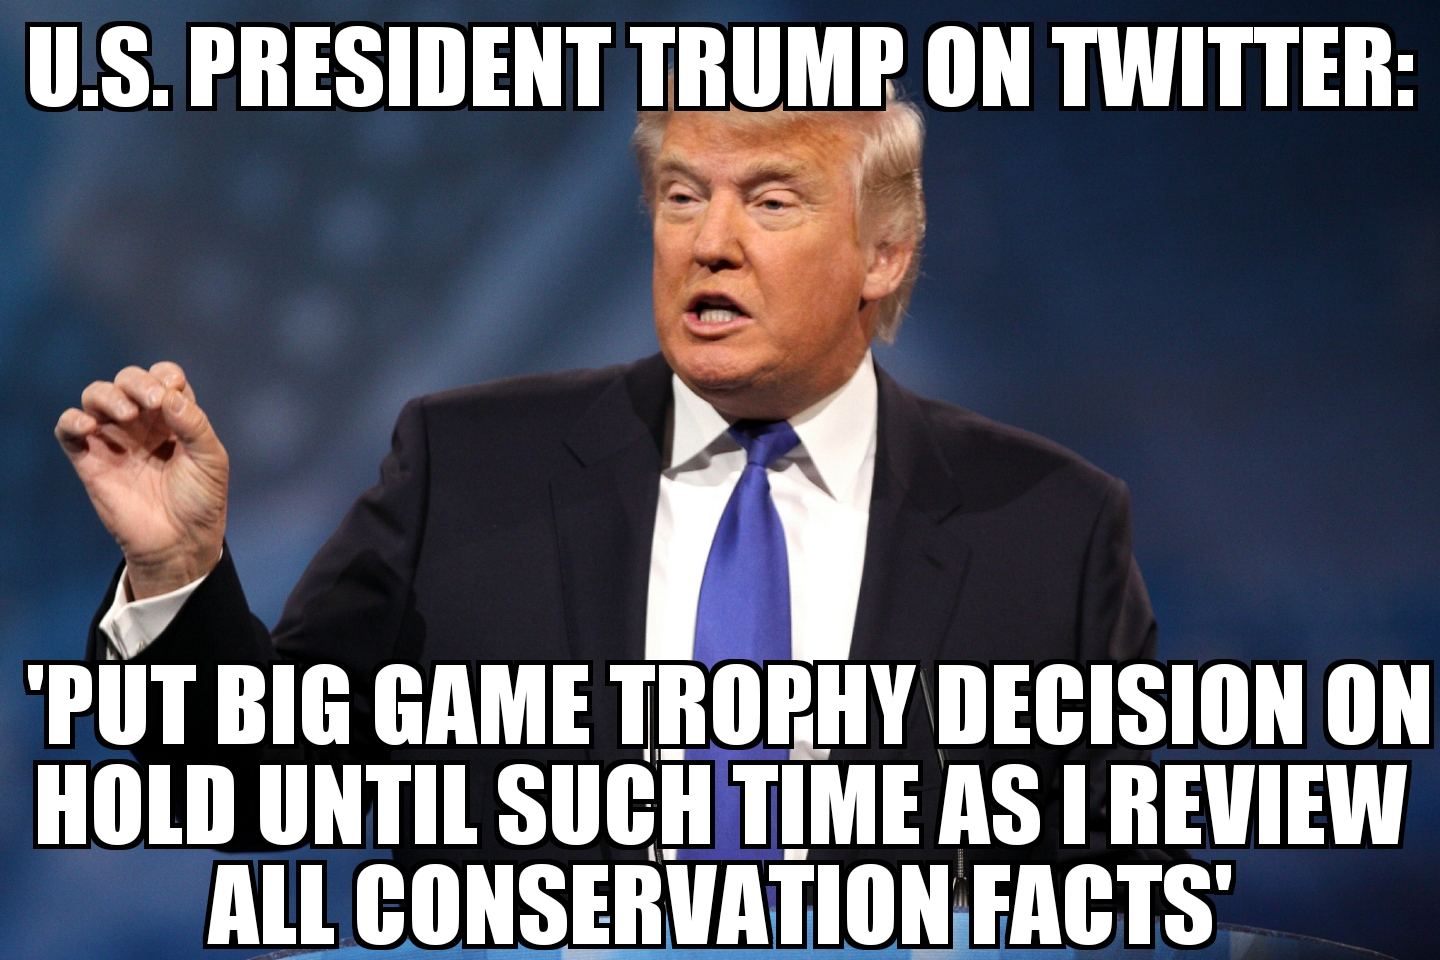 Trump puts big game trophy decision on hold